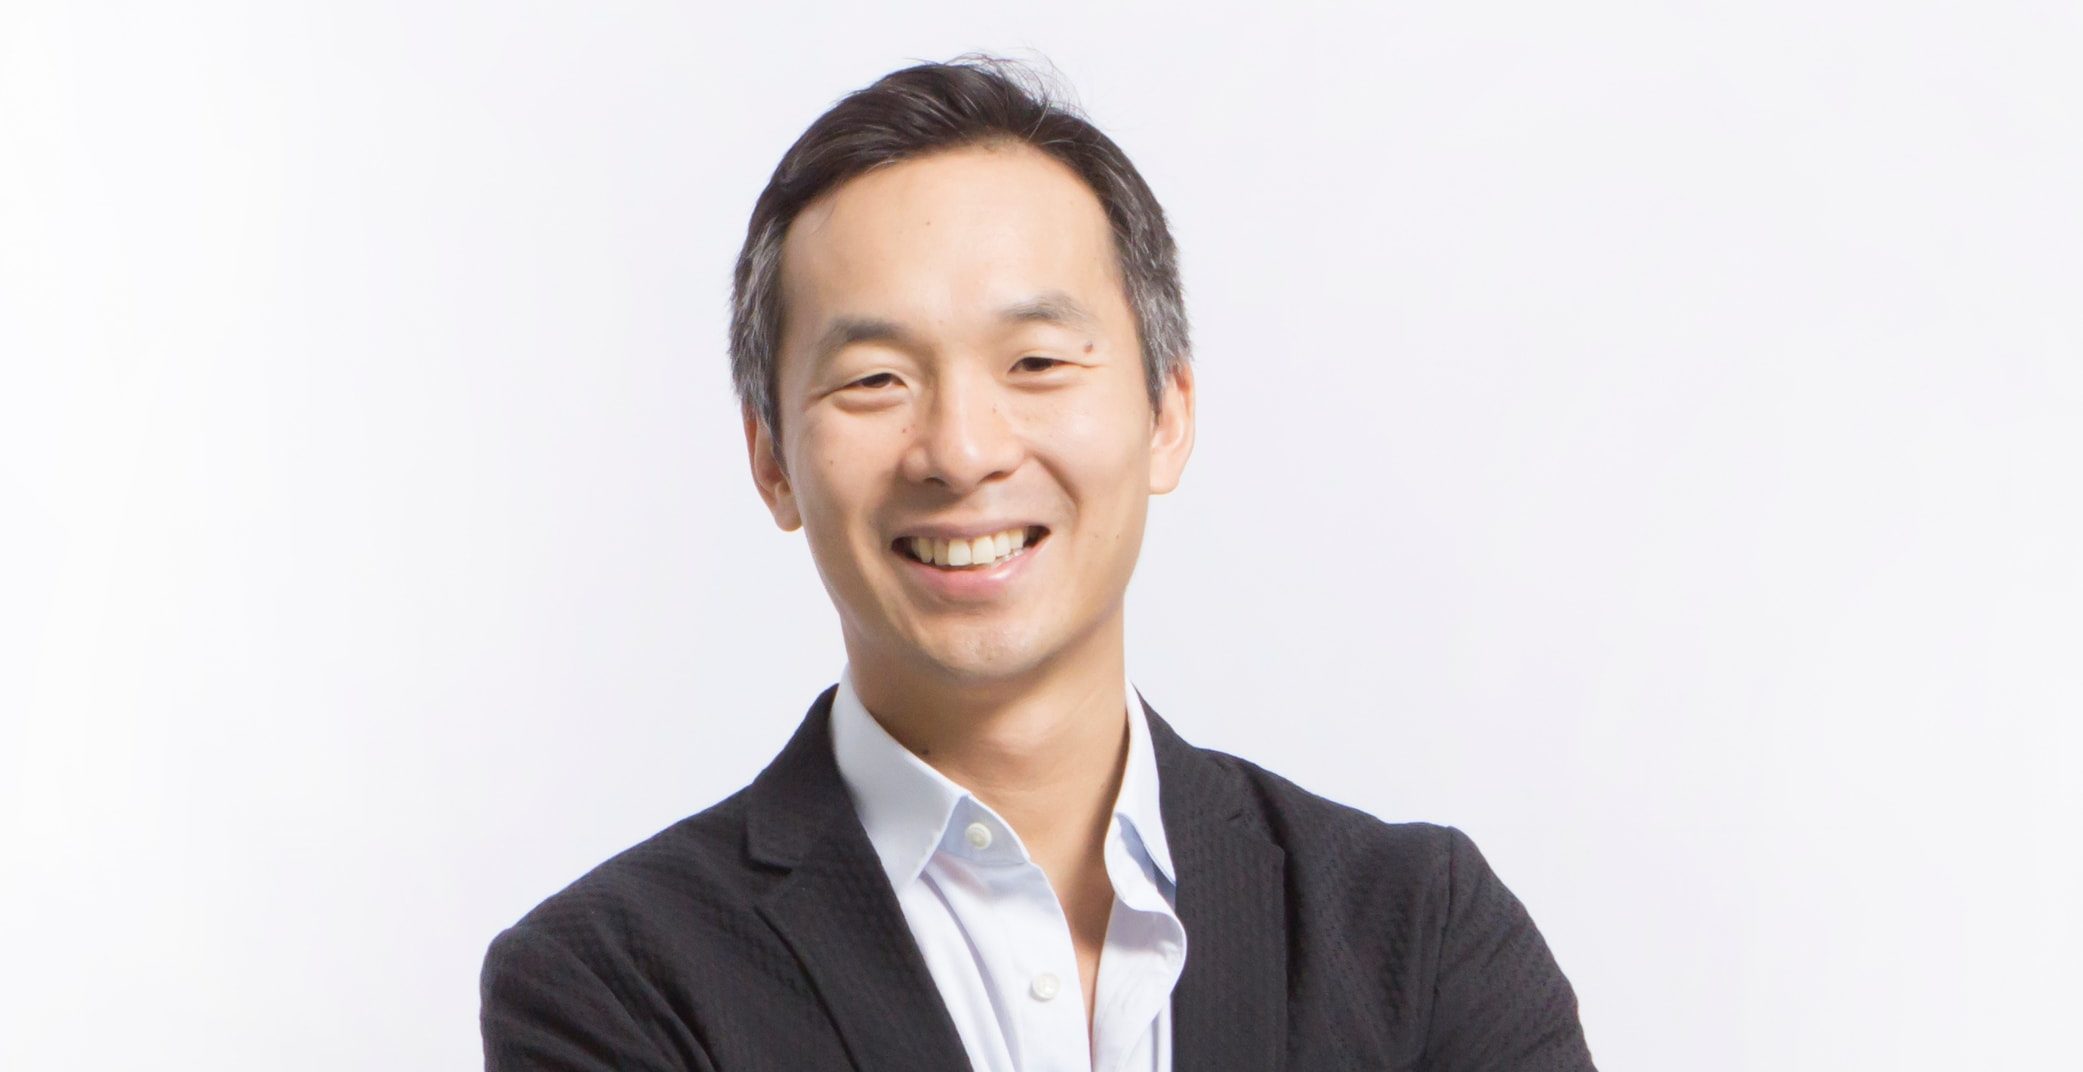 Indonesia sees wave of savvy founders doing due diligence on VCs, says AC Ventures's Adrian Li